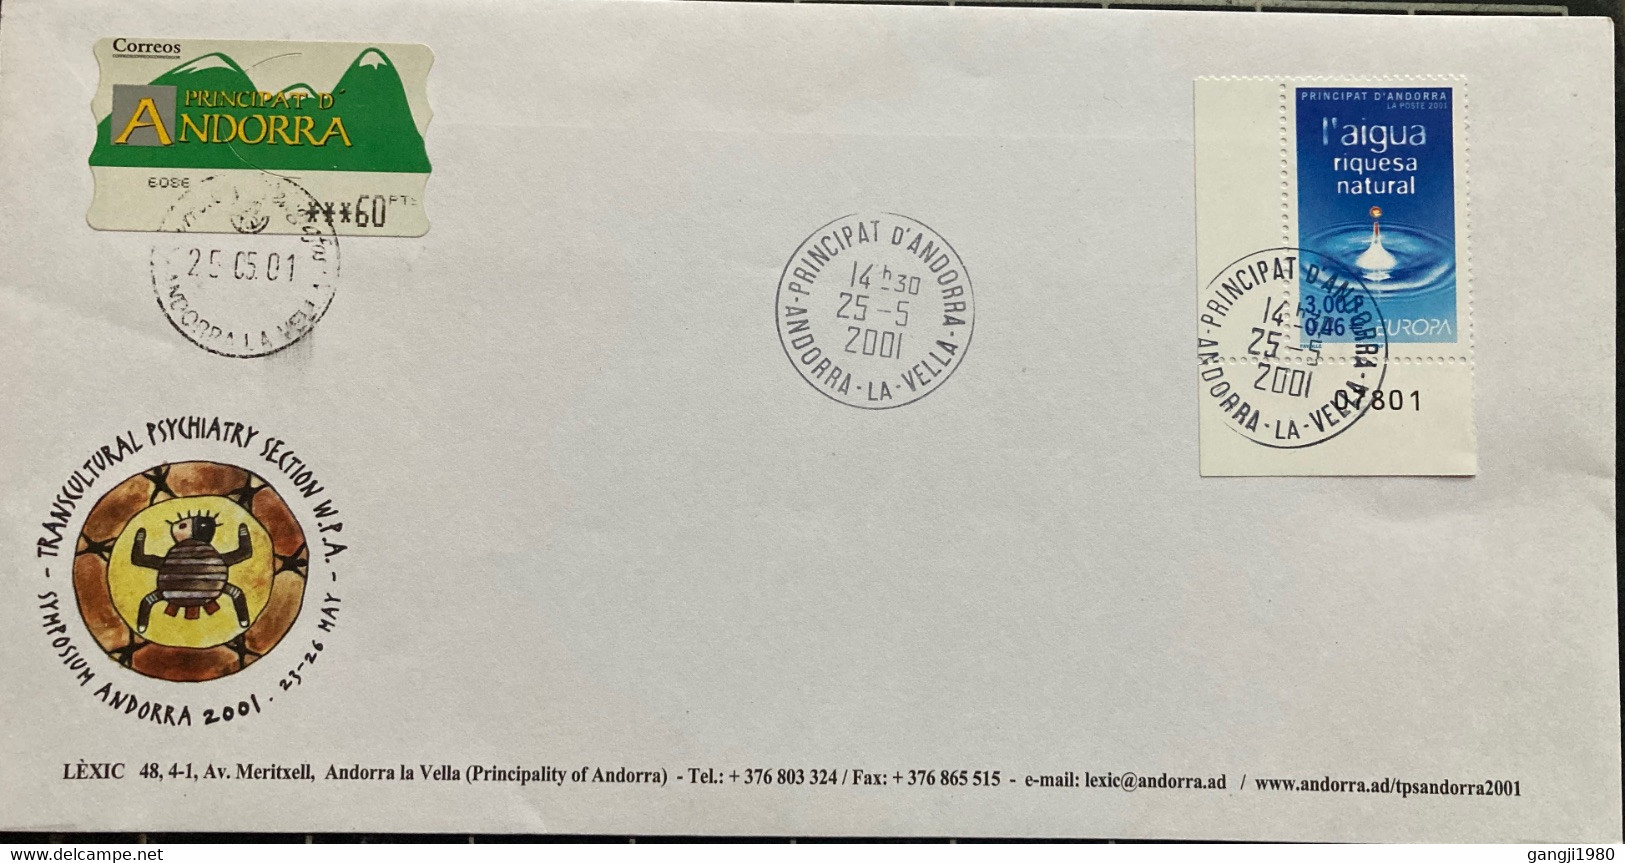 ANDORRA 2001,TRANSCULTURAL PSYCHOLOGY,ILLUSTRATED SPECIAL USED COVER, EUROPA,NAIGUA RIQUESA NATURAL, STAMP PLATET NUMBER - Briefe U. Dokumente